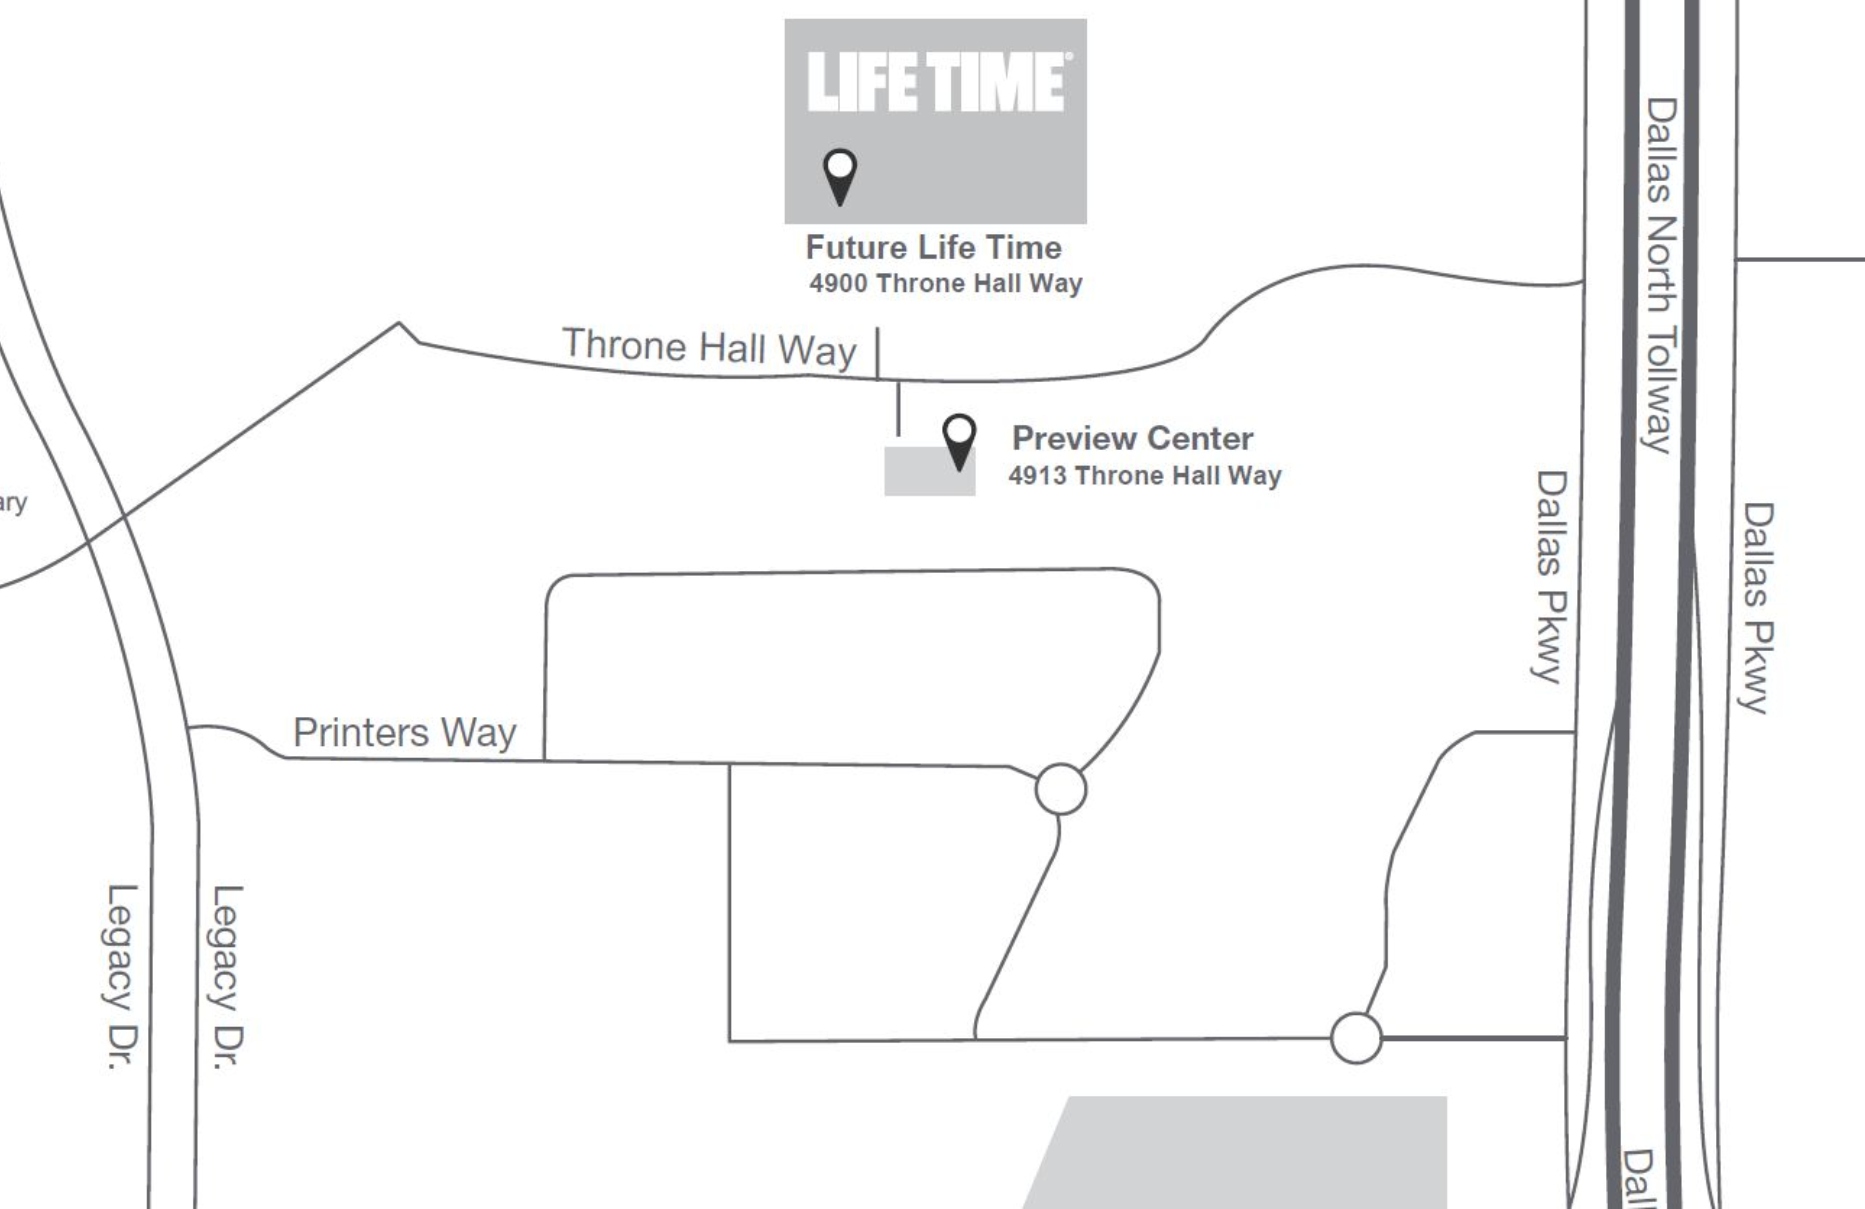 Illustrated map of the preview center and future club location of Life Time in Frisco, TX